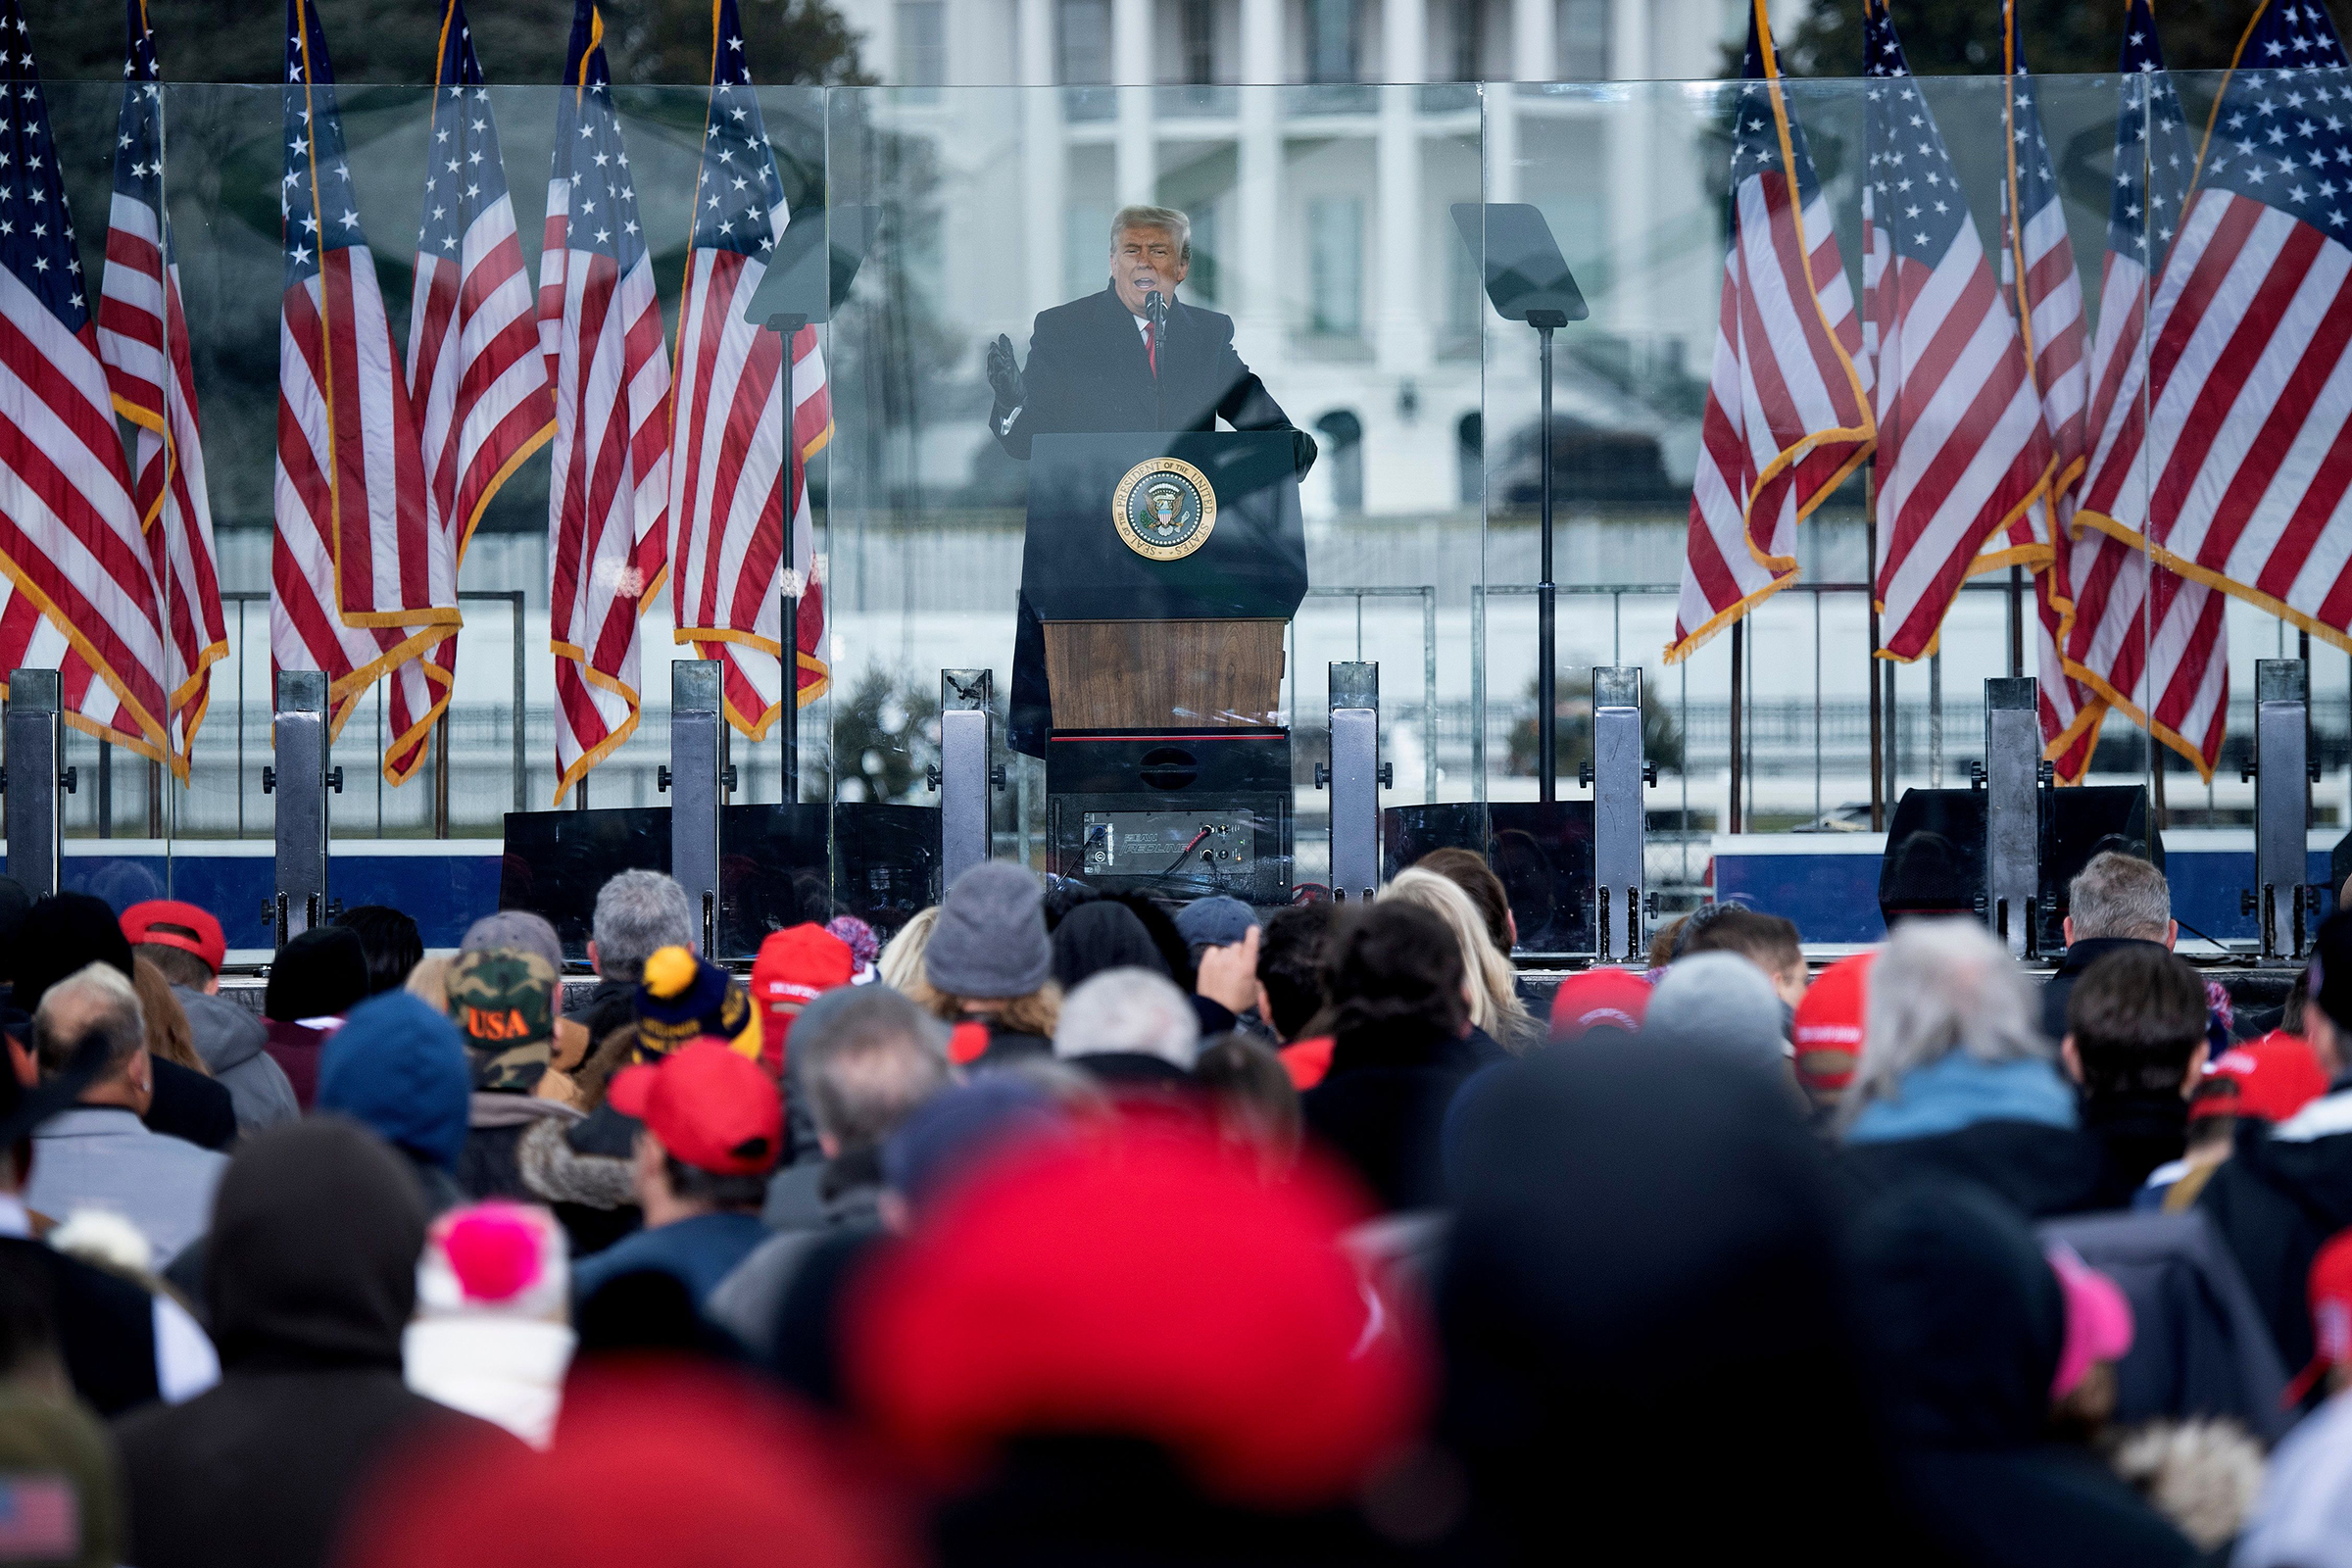 US President Donald Trump speaks to supporters from The Ellipse near the White House, in Washington, DC on January 6, 2021. After his speech and fueled by Trump's weeks-long attempt to overturn the results of the 2020 presidential election, thousands of his supporters stormed the U.S. Capitol